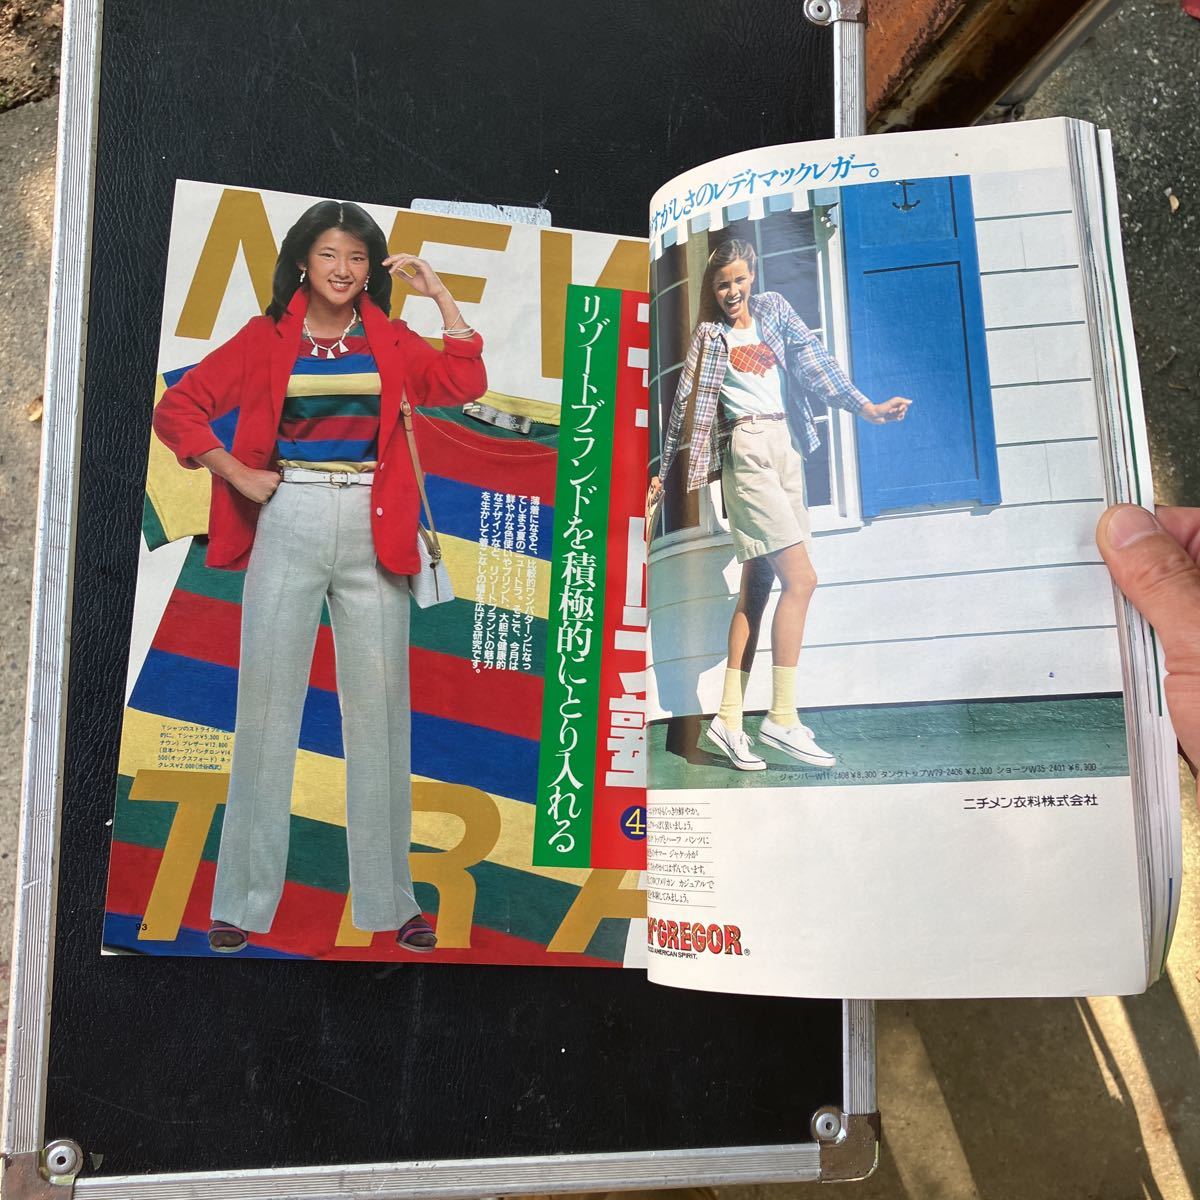 [ present condition goods ] magazine JJ/ J * J 1981 year 7 month number * cover : height .../ new tiger city catalog Watanabe . Hara Tokyo woman . pavilion short period university 